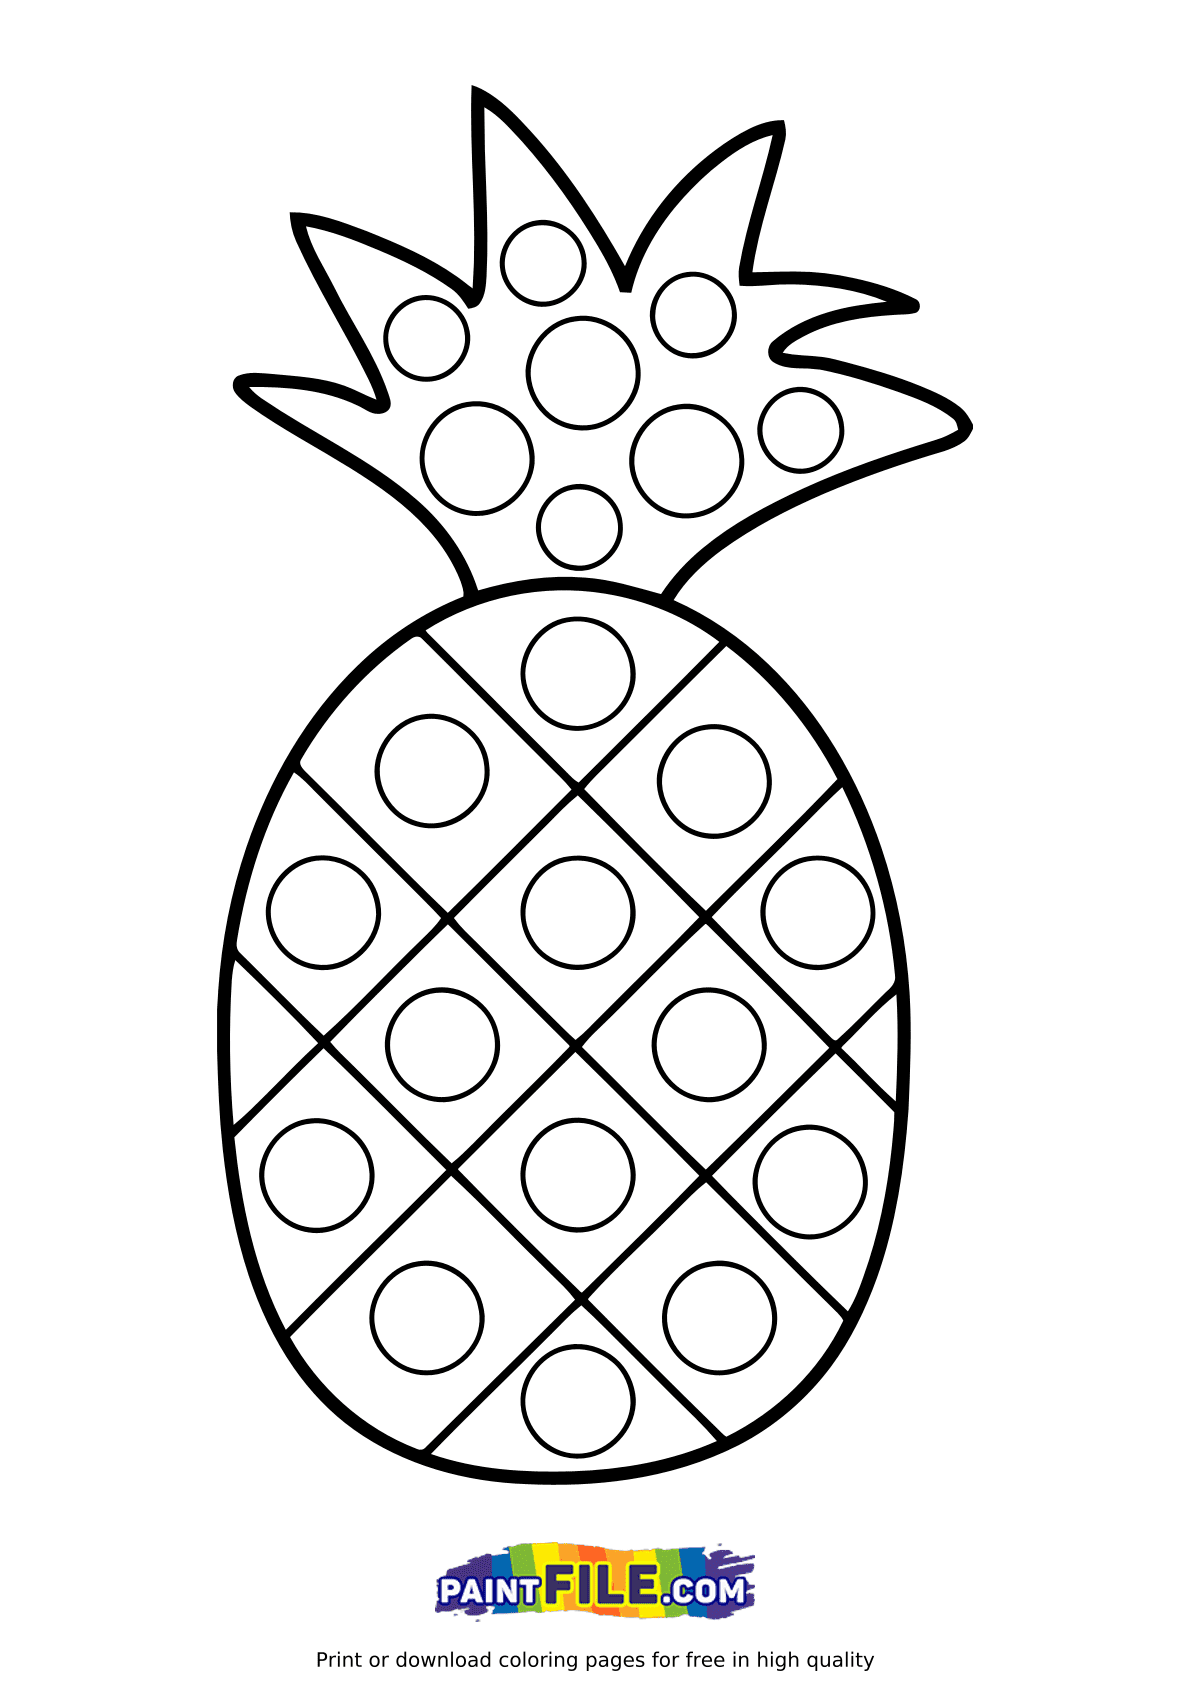 Pop it Yummy Pineapple Coloring Page